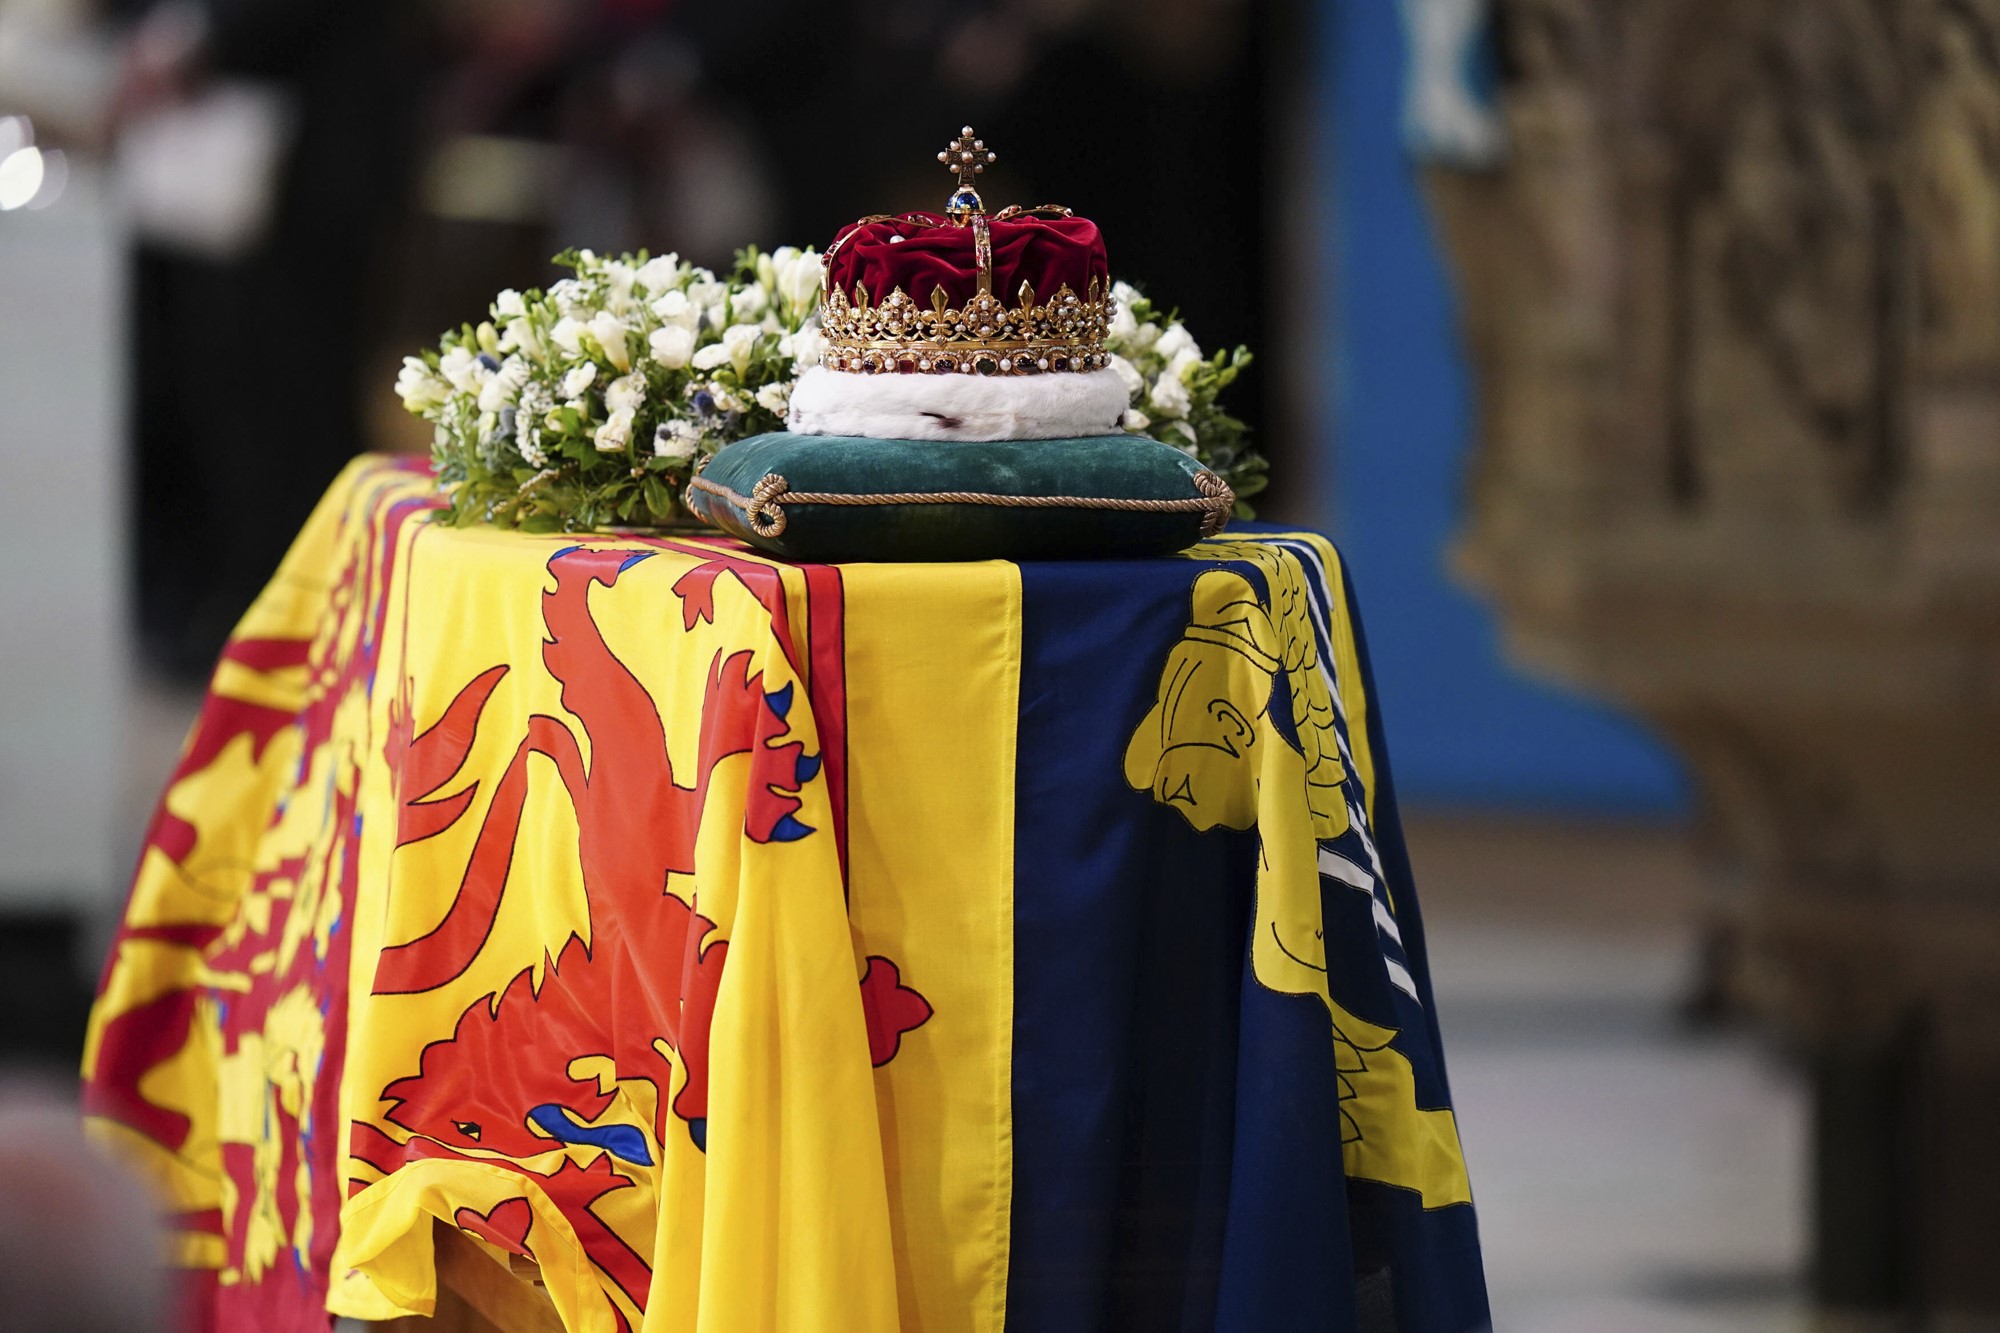 The Crown of Scotland sits atop the coffin of Queen Elizabeth II during a Service of Prayer and Reflection for her life